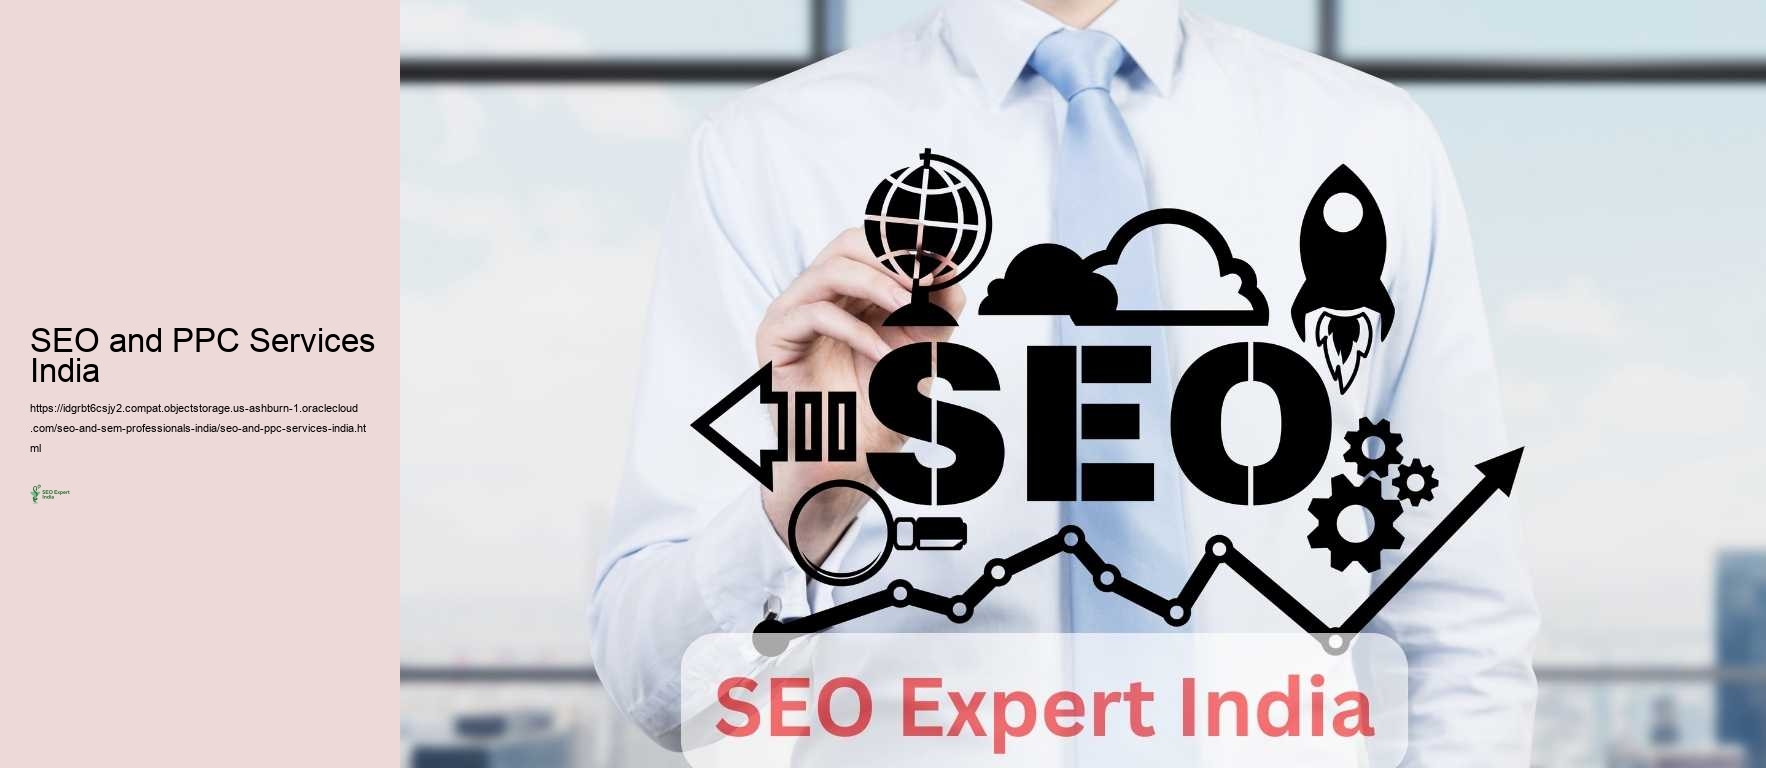 SEO and PPC Services India